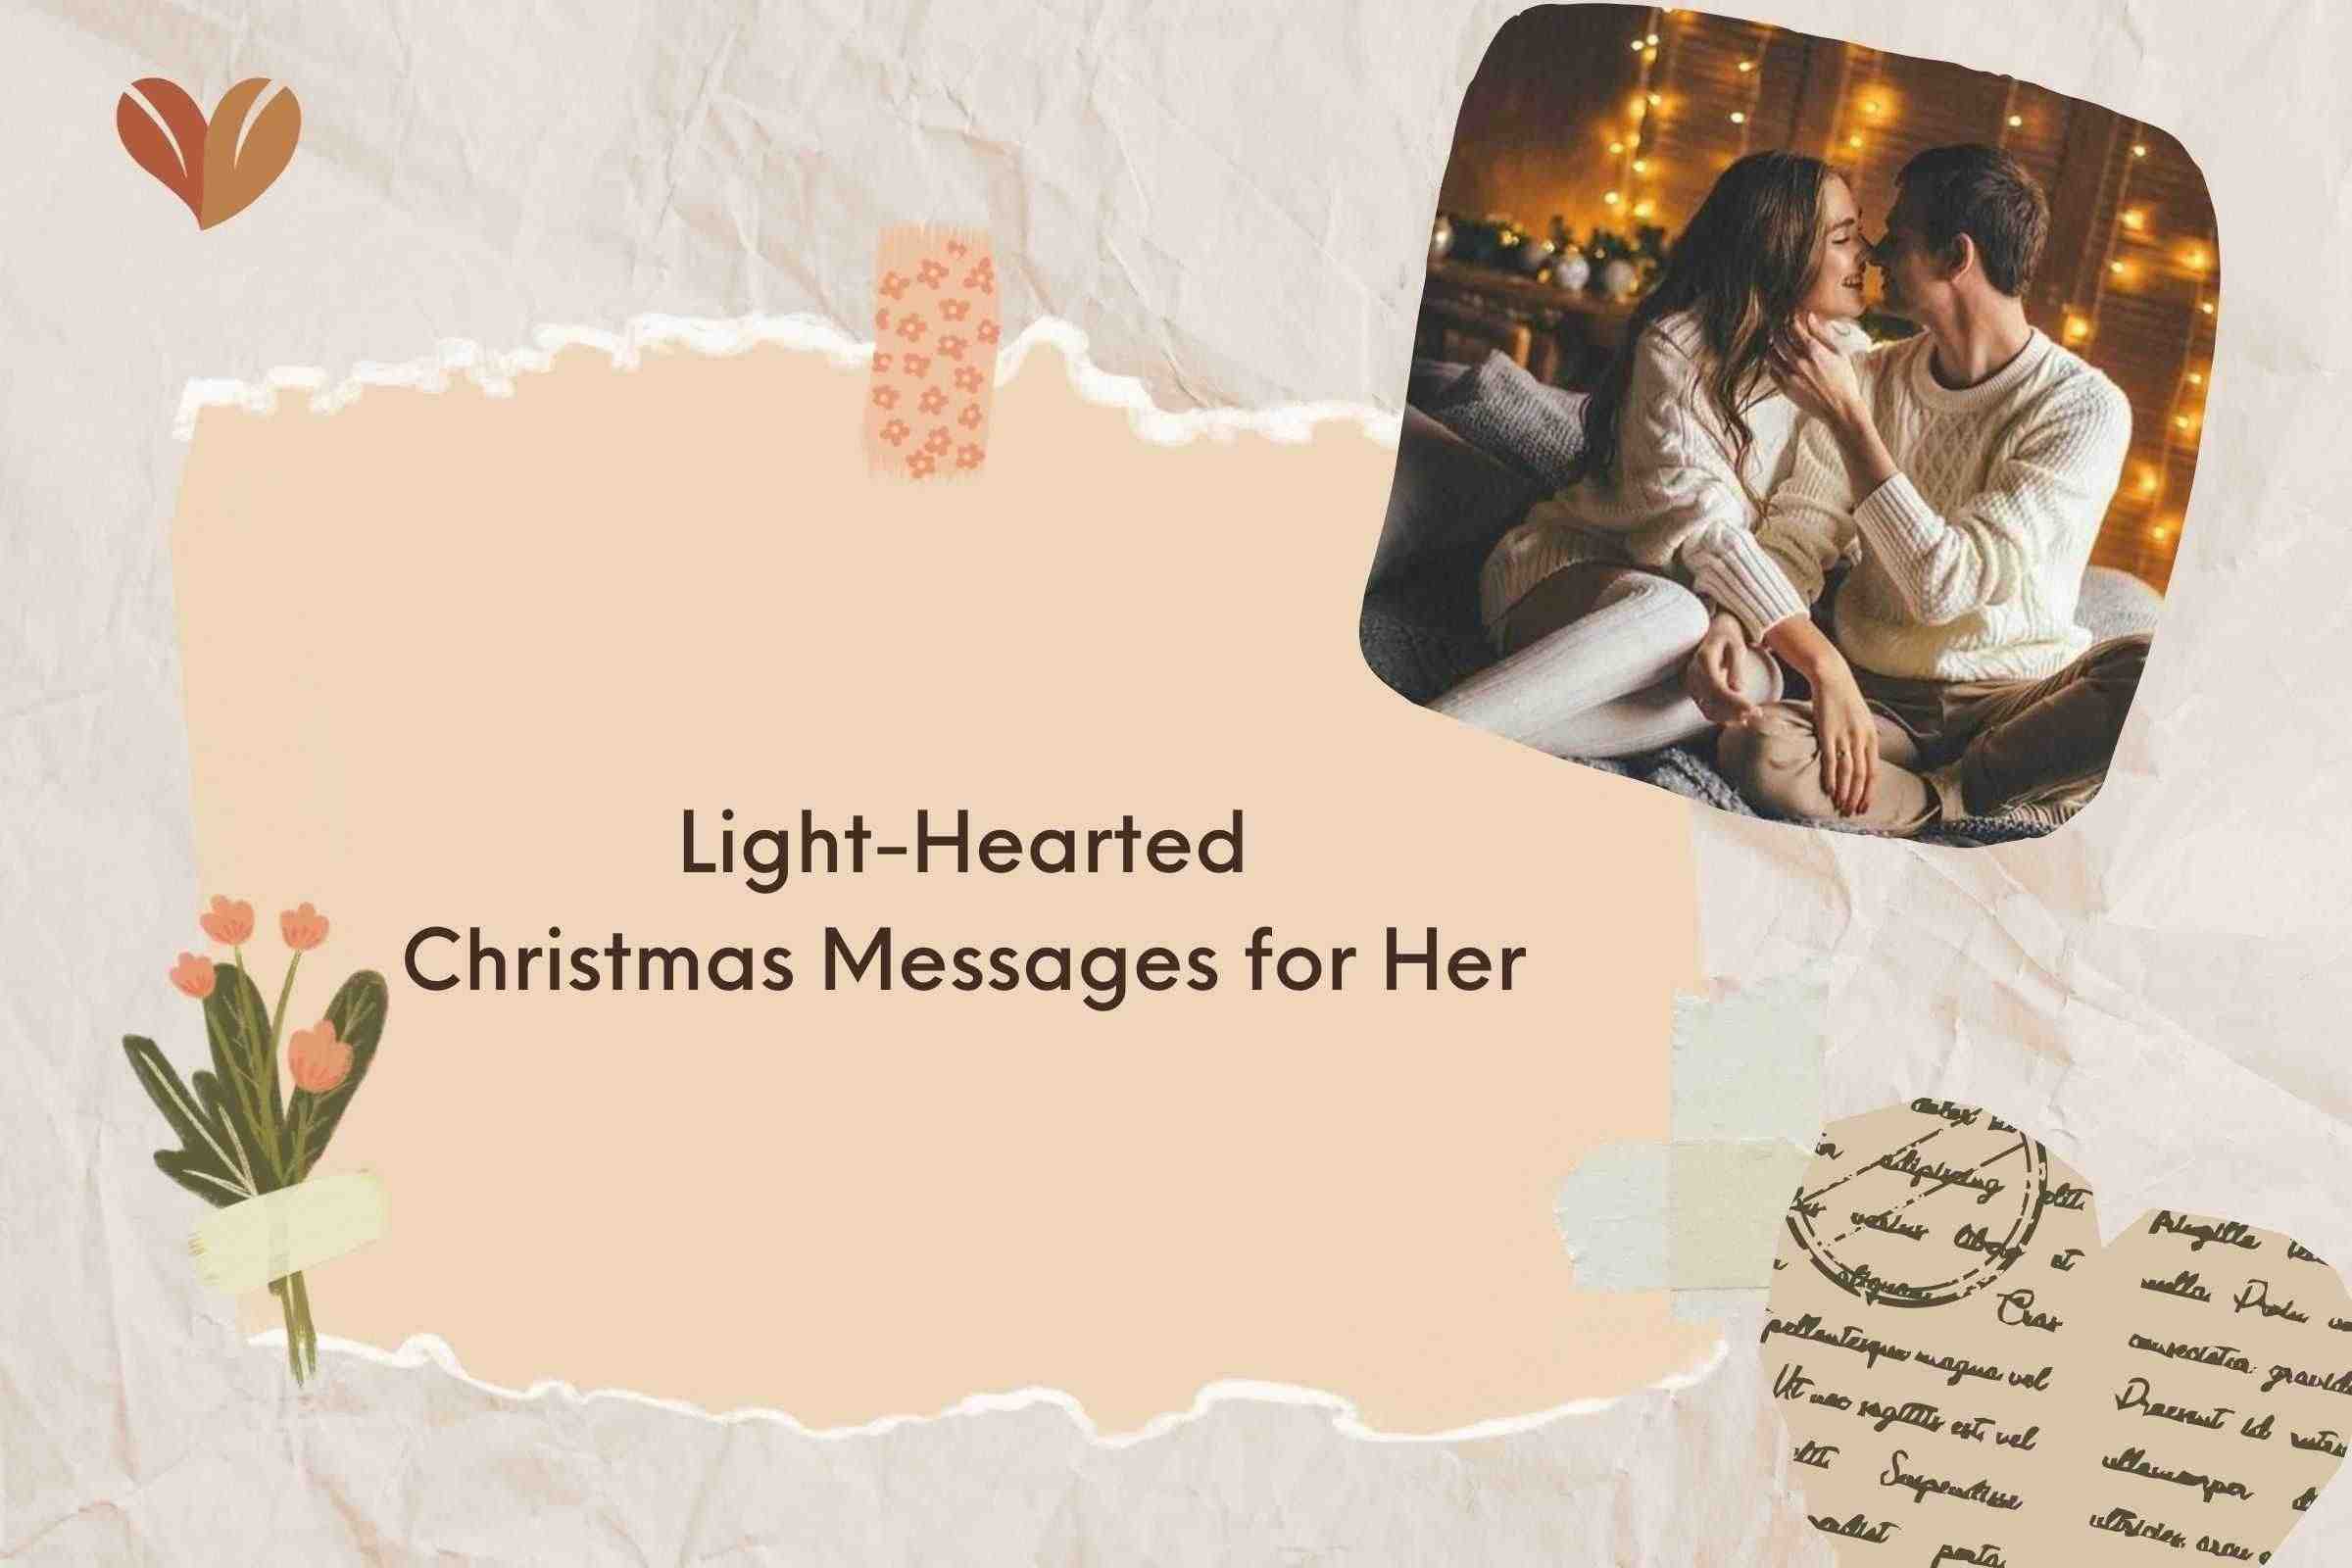 Light-Hearted Christmas Messages for Her